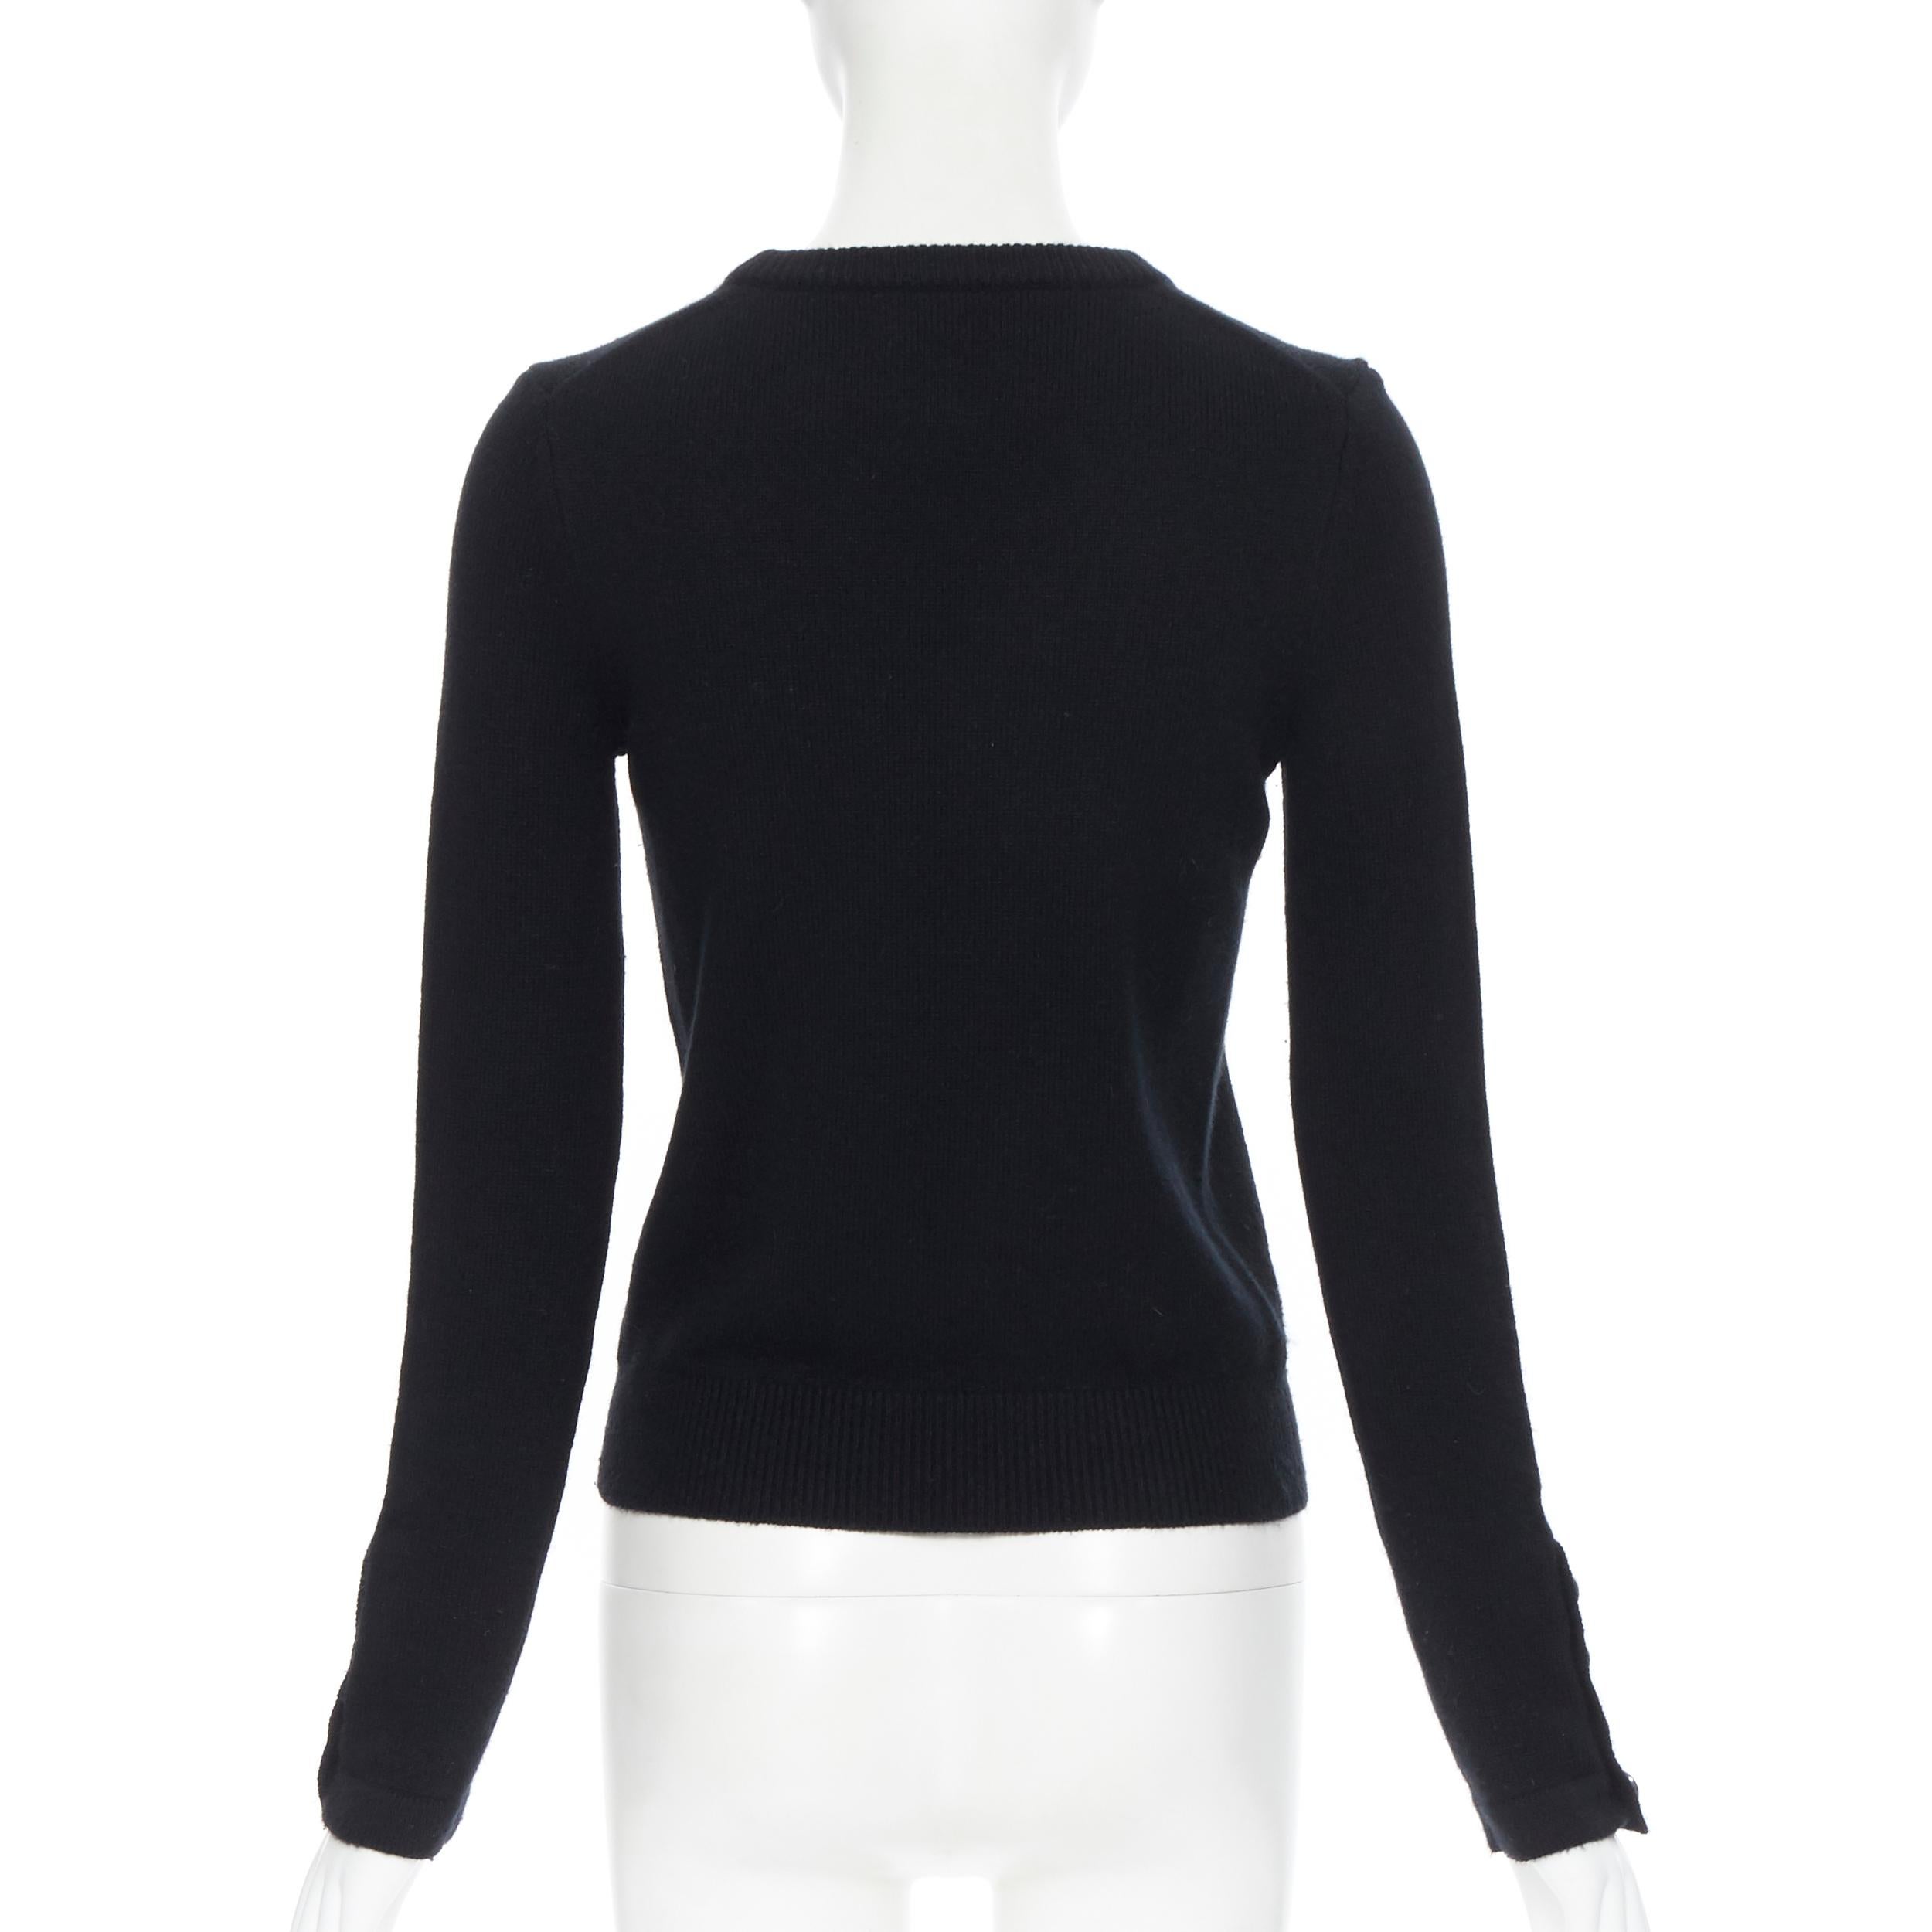 Black MICHAEL KORS COLLECTION 100% cashmere black long sleeve pullover sweater XS